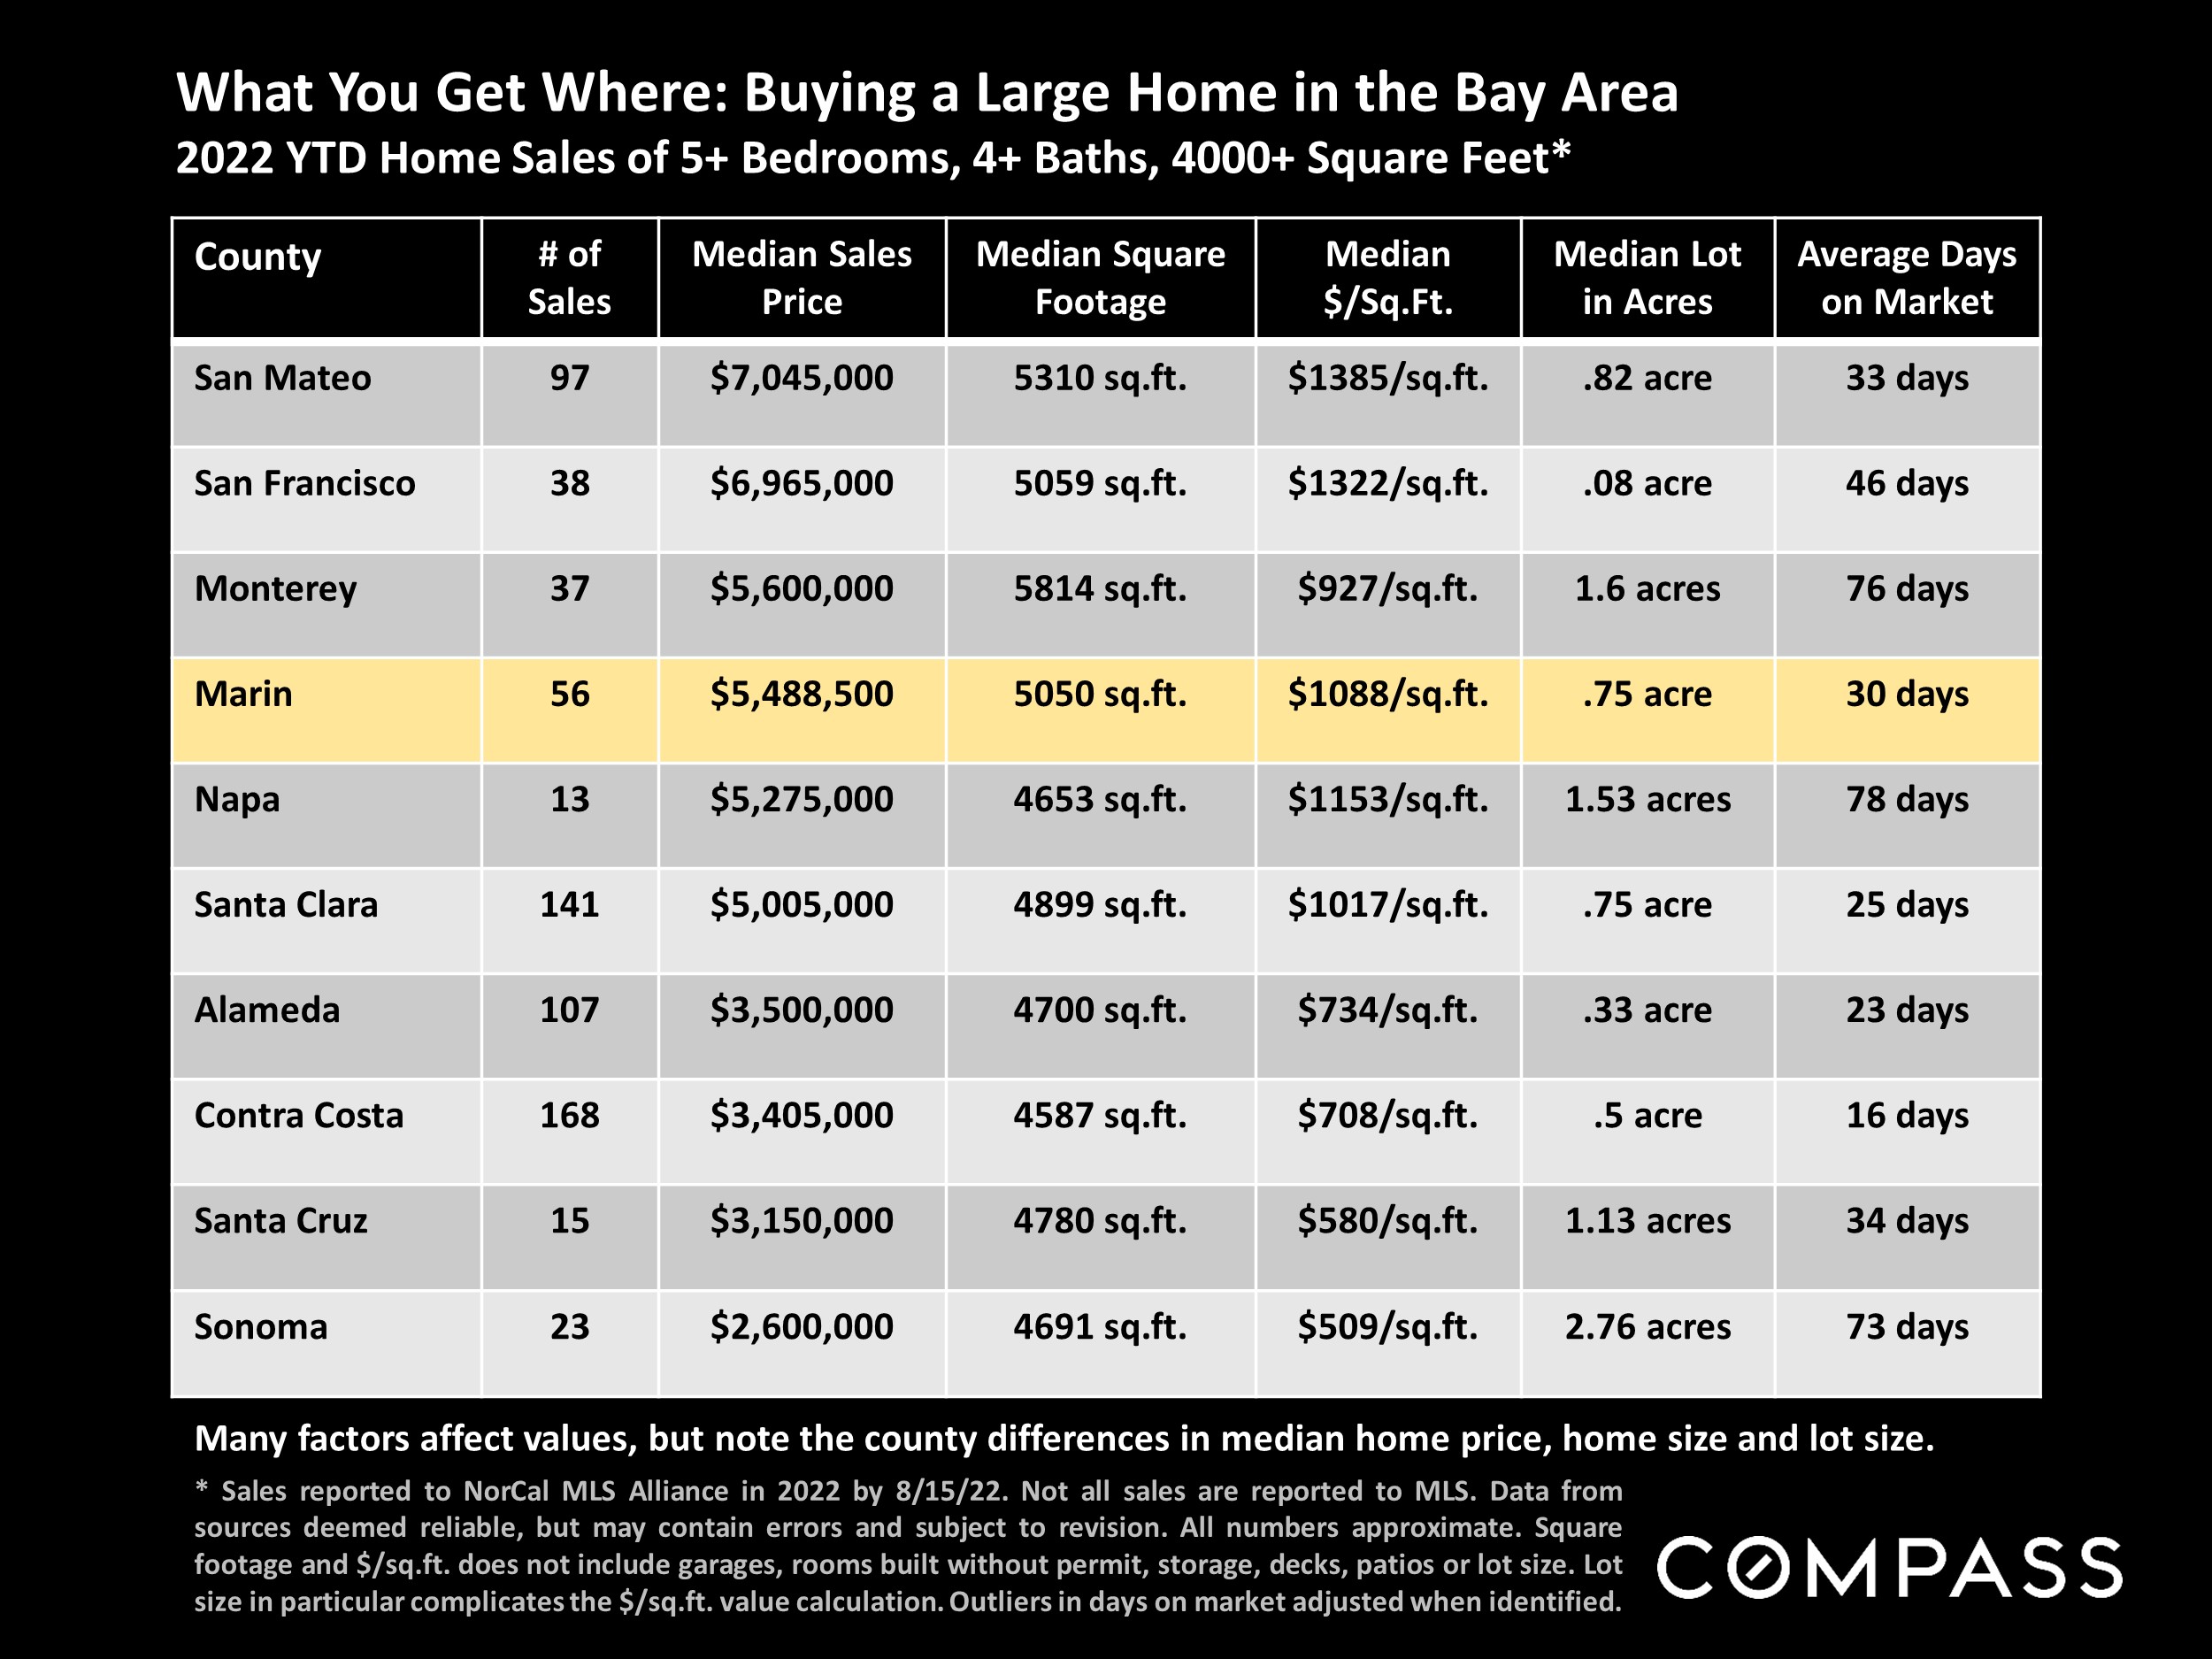 What You Get Where: Buying a Large Home in the Bay Area